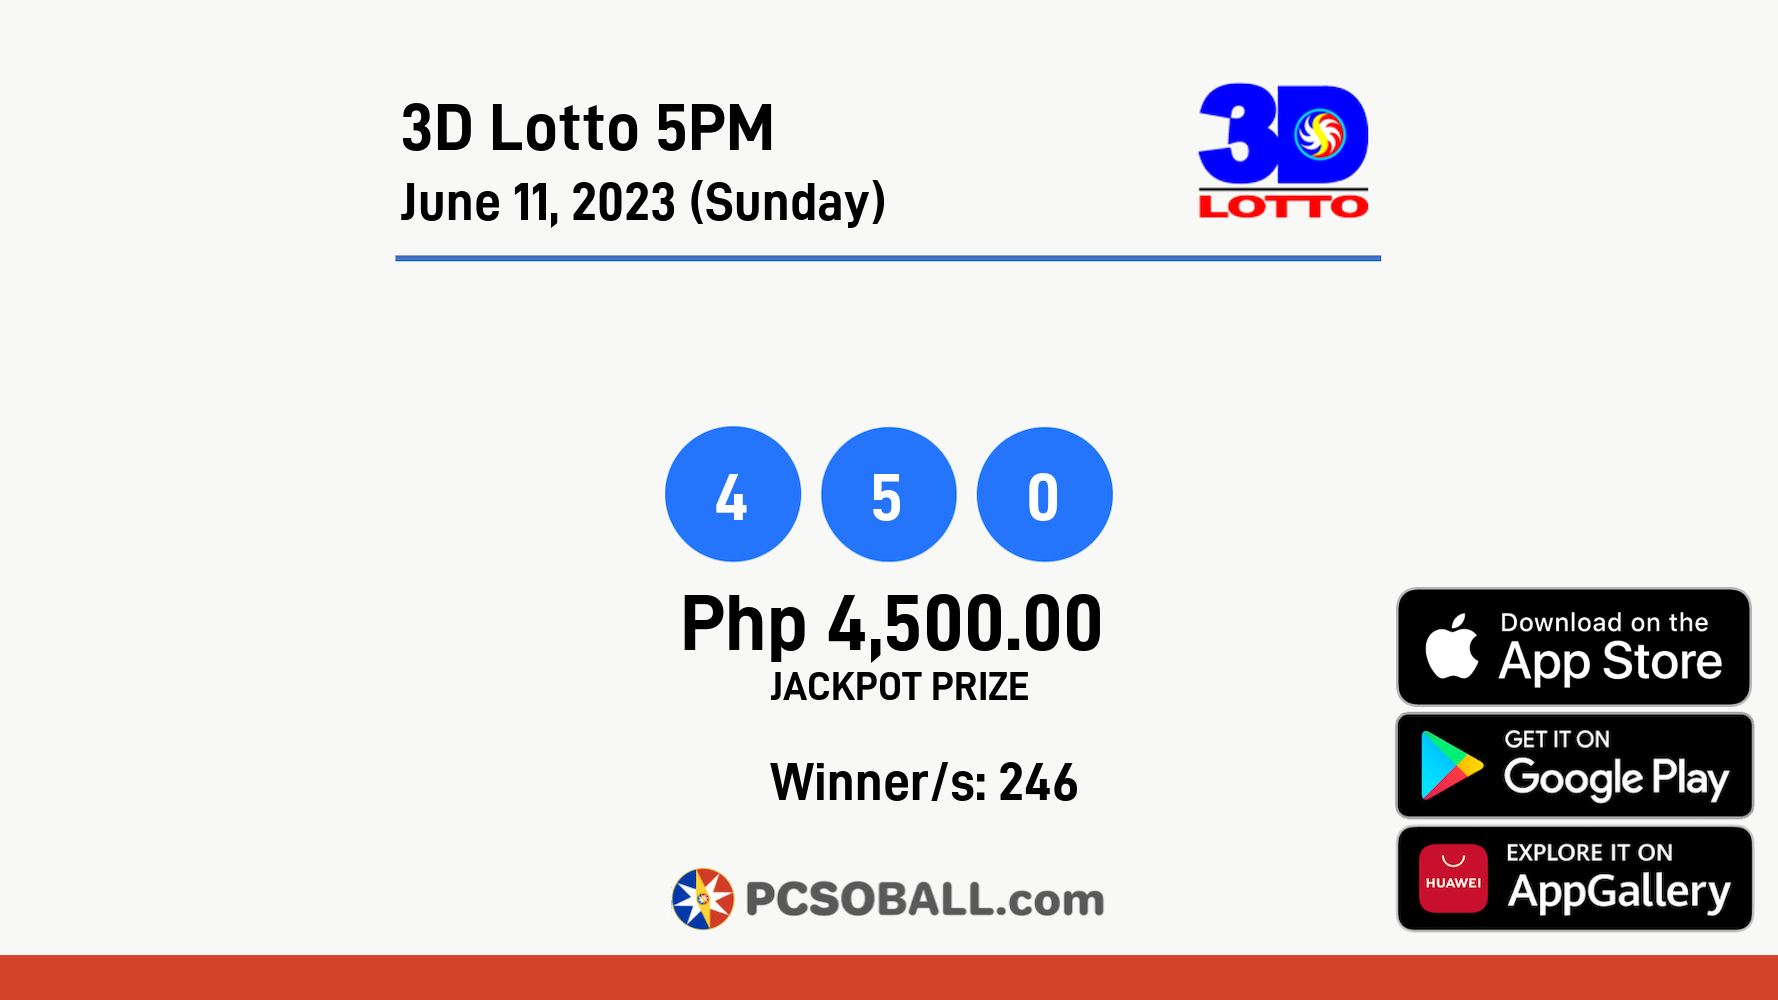 3D Lotto 5PM June 11, 2023 (Sunday) Result